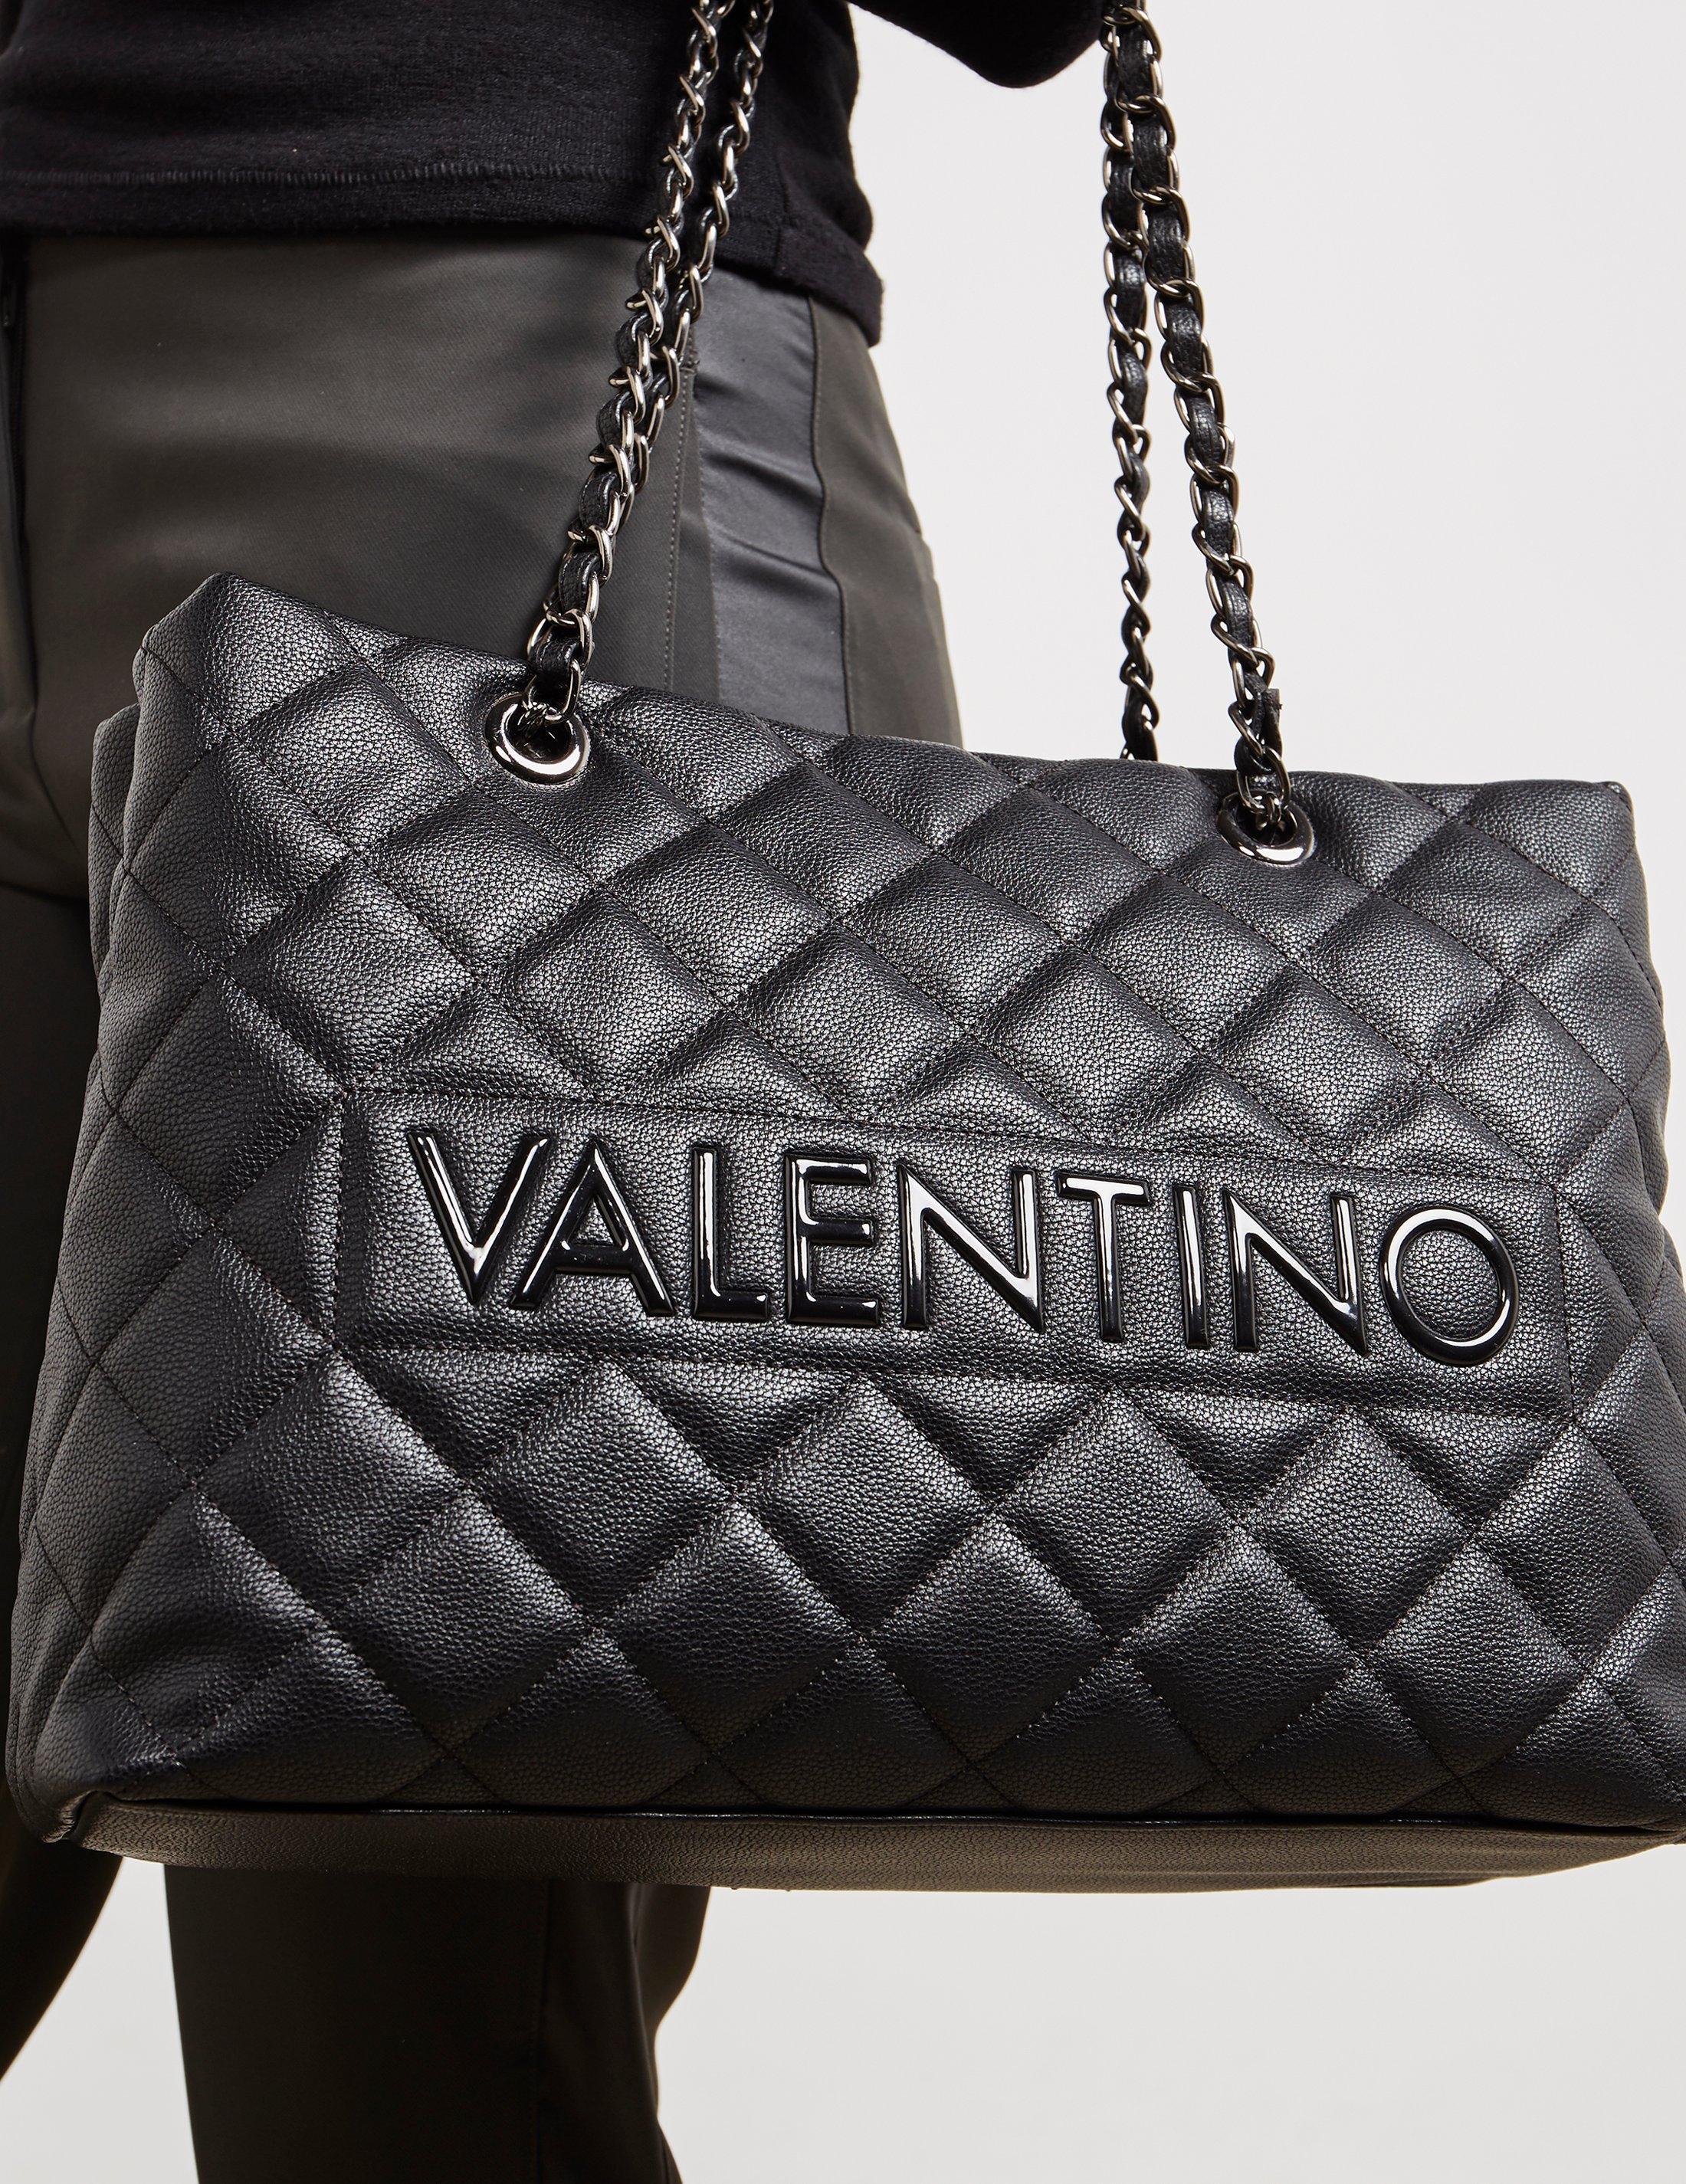 Valentino Licia Quilted Shoulder Bag Clearance, SAVE 54%.